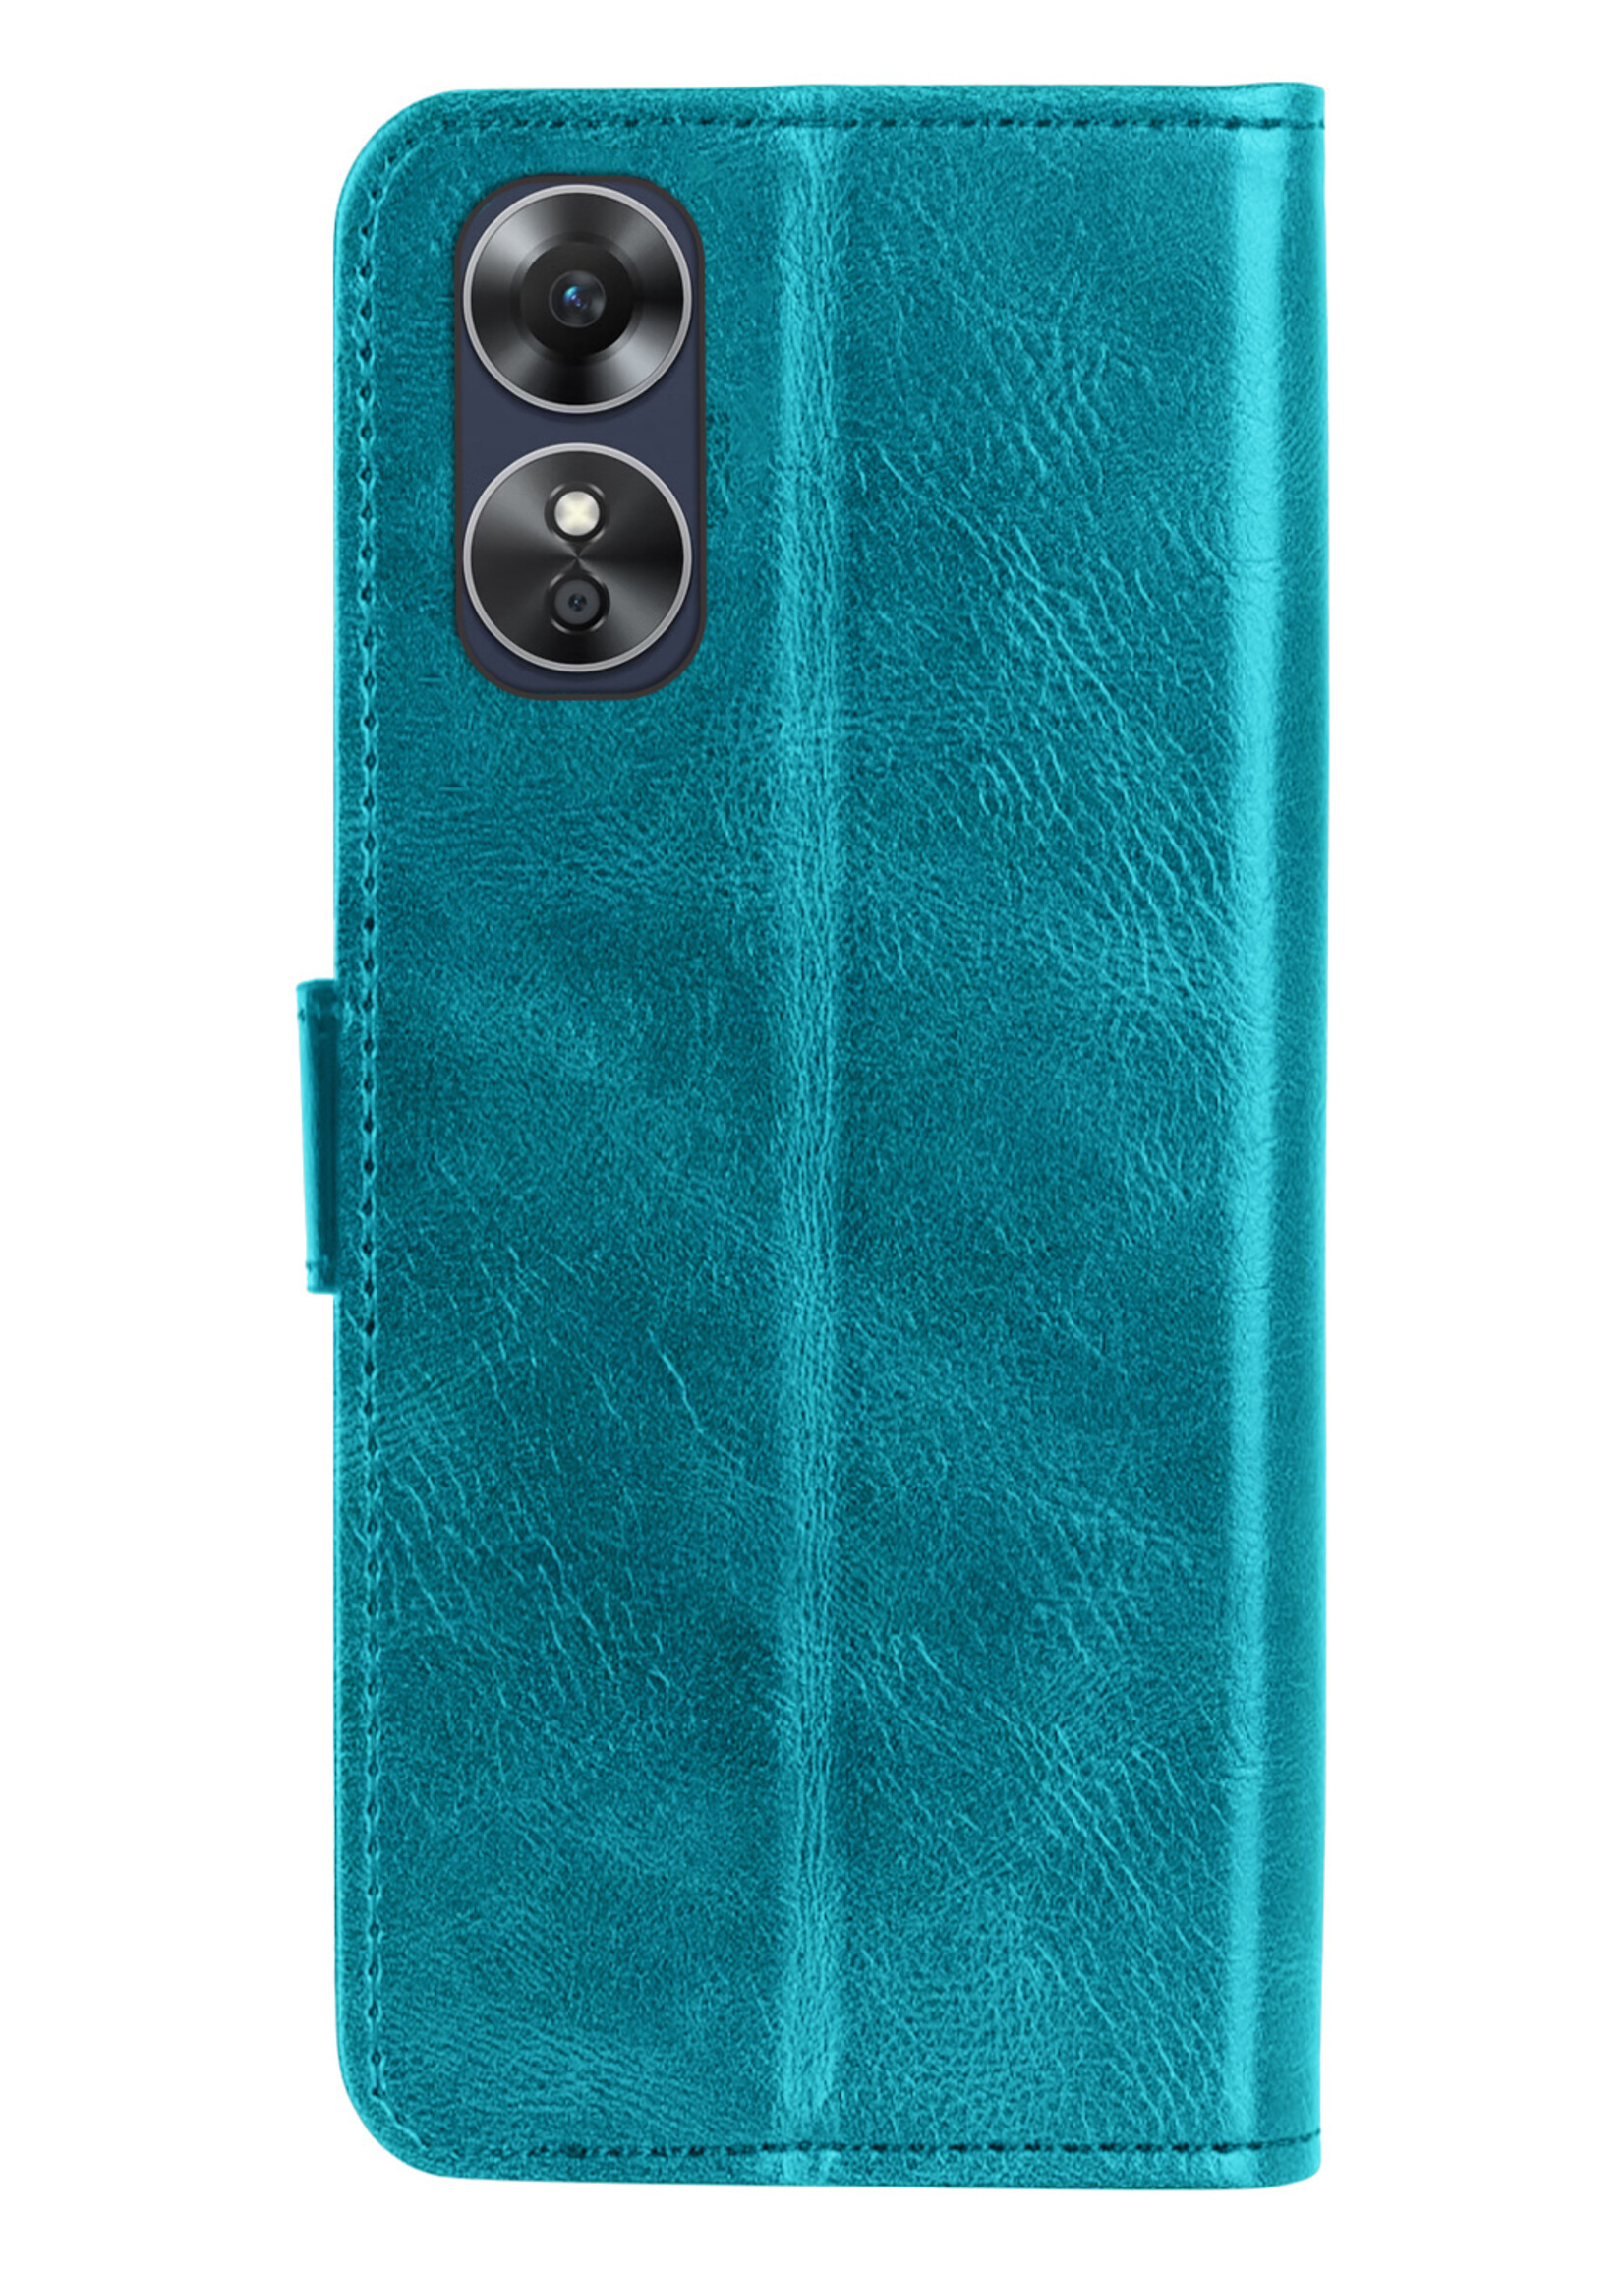 BTH OPPO A17 Hoesje Book Case Hoes Portemonnee Cover Walletcase - OPPO A17 Hoes Bookcase Hoesje - Turquoise